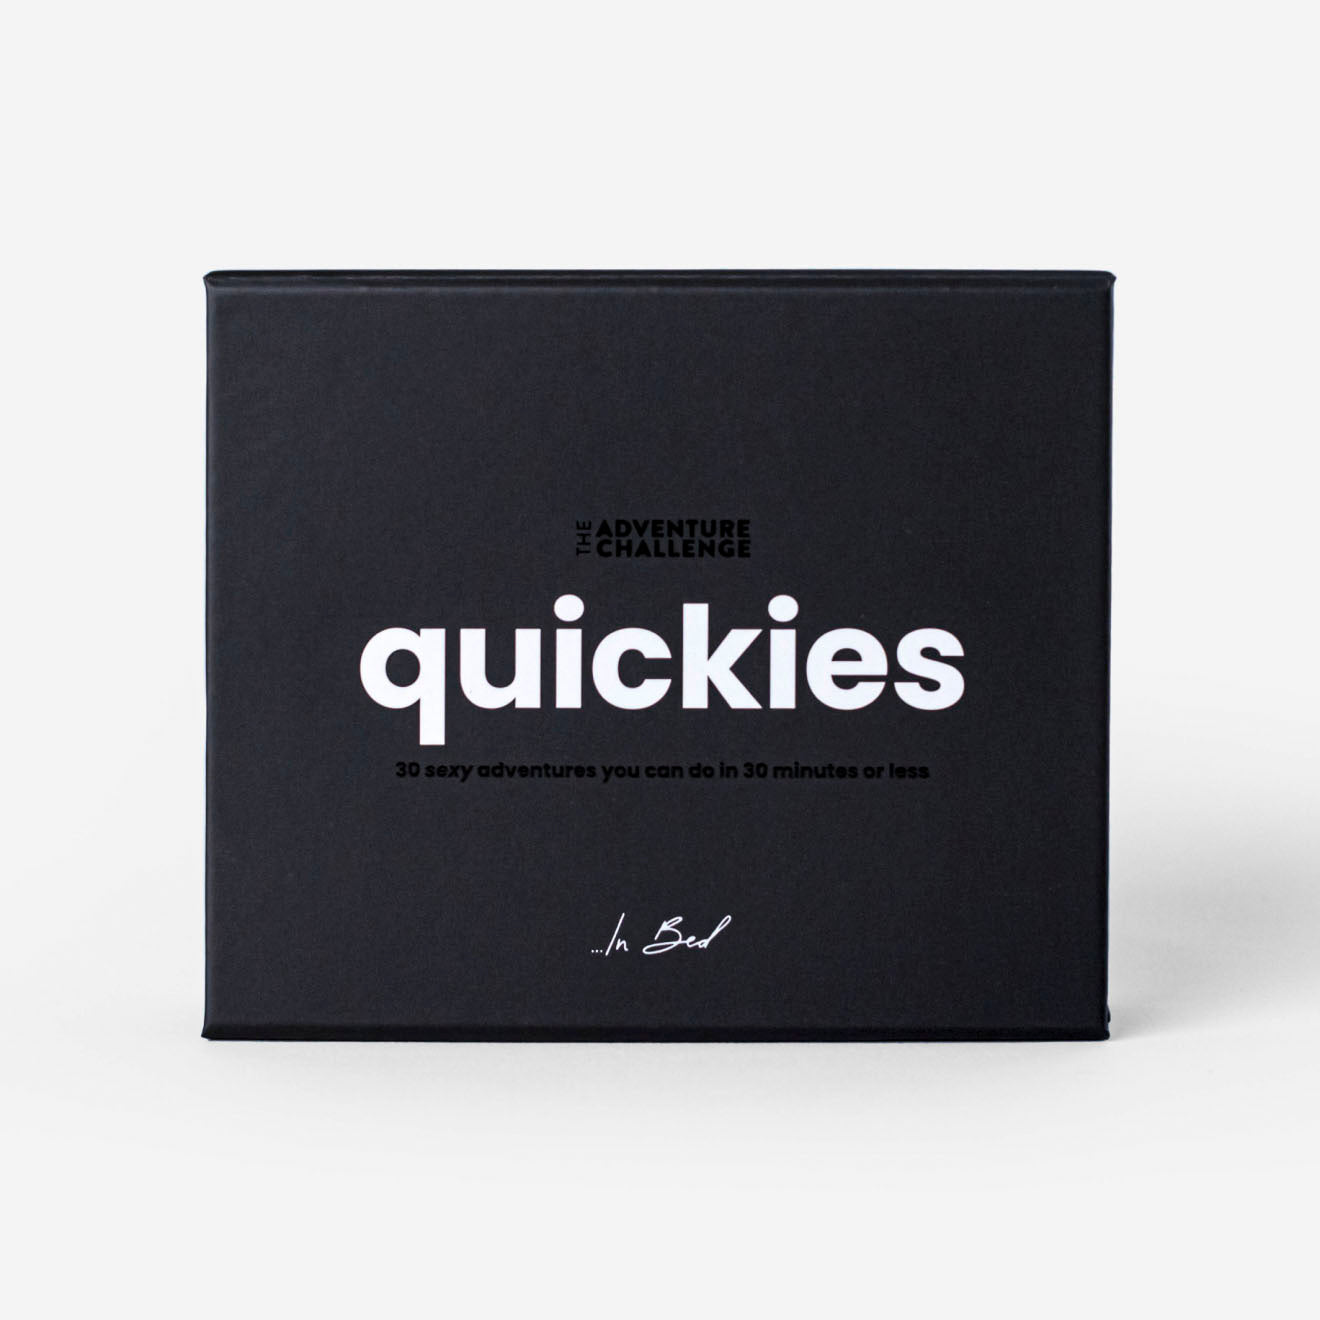 Quickies and Couples Camera Bundle